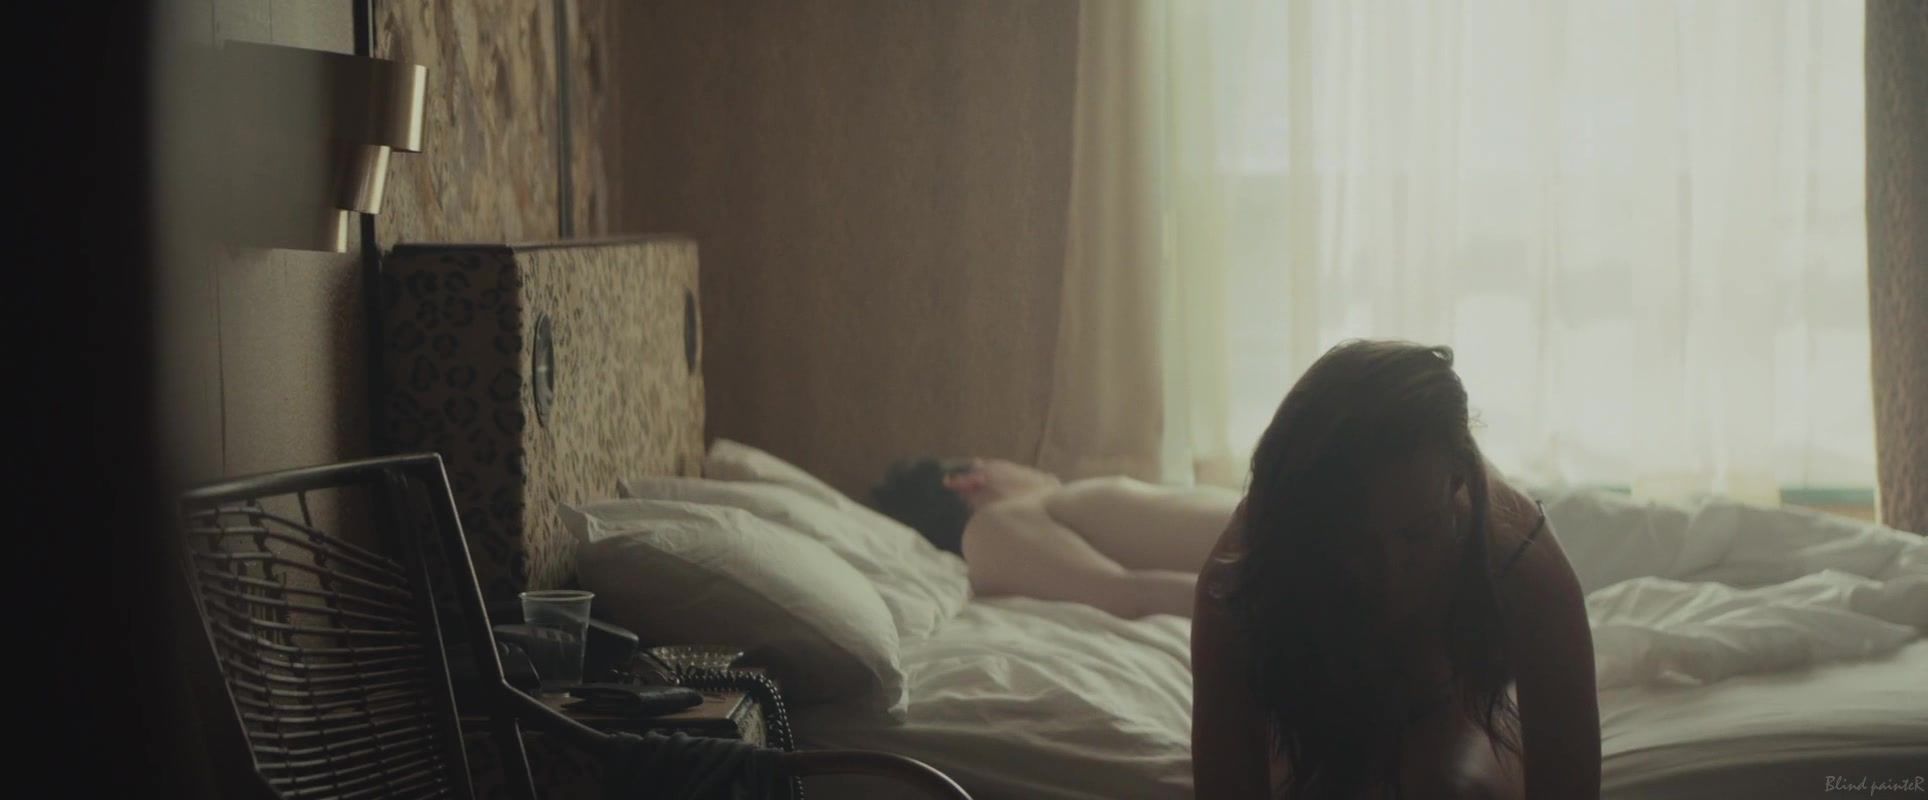 Girl Gets Fucked Olivia Wilde nude - Meadowland (2015) Perfect Tits